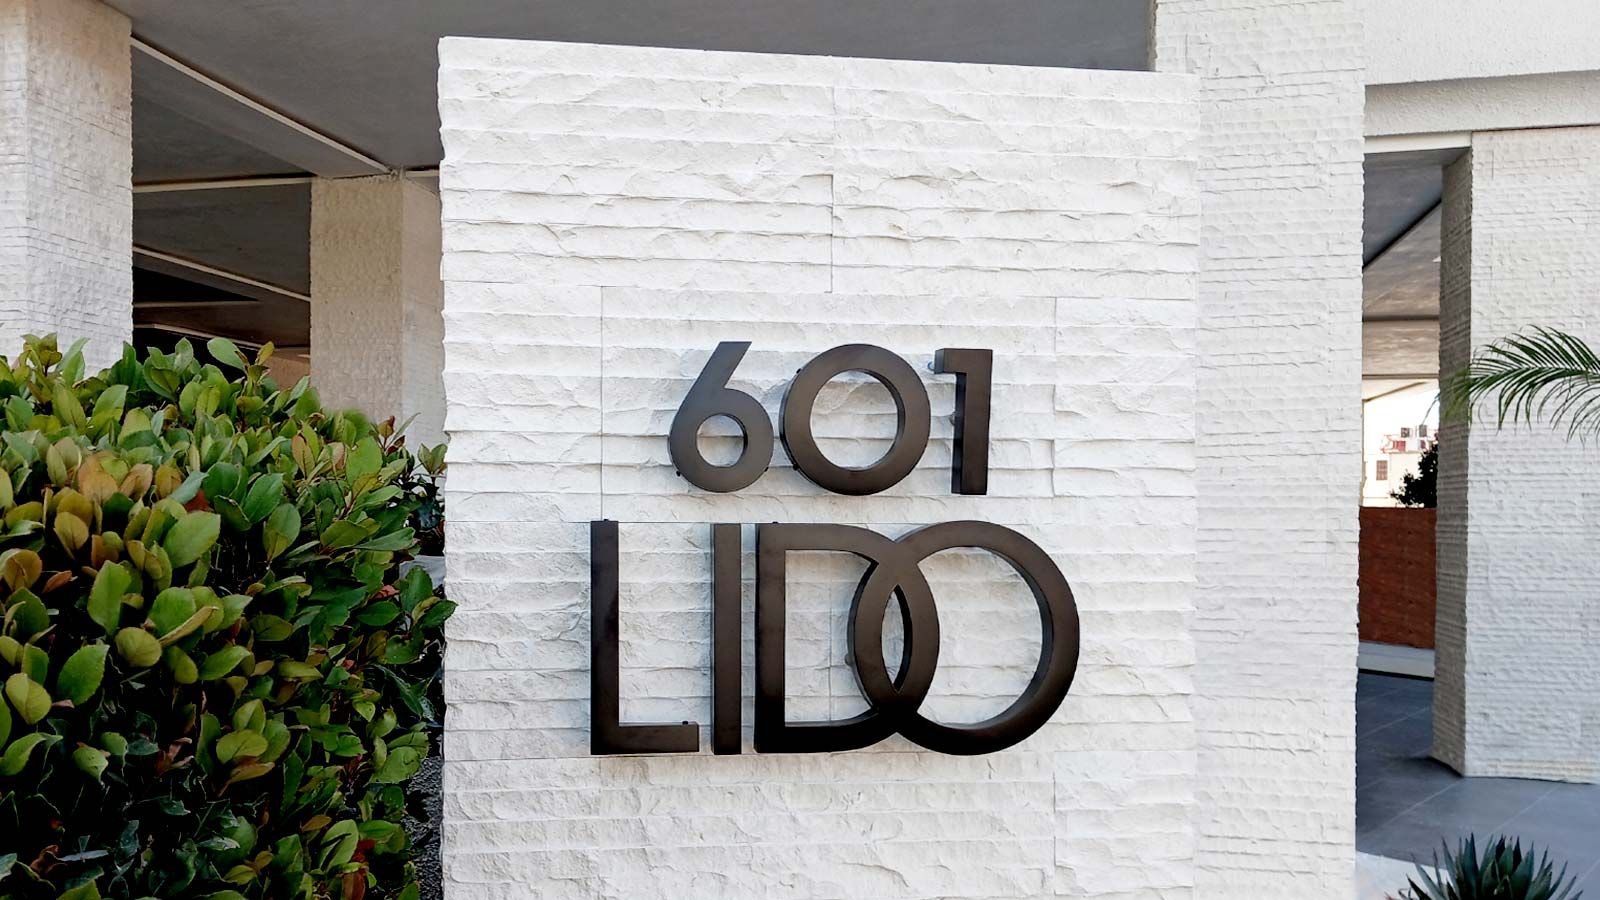 601 Lido 3D sign attached to the wall outdoors